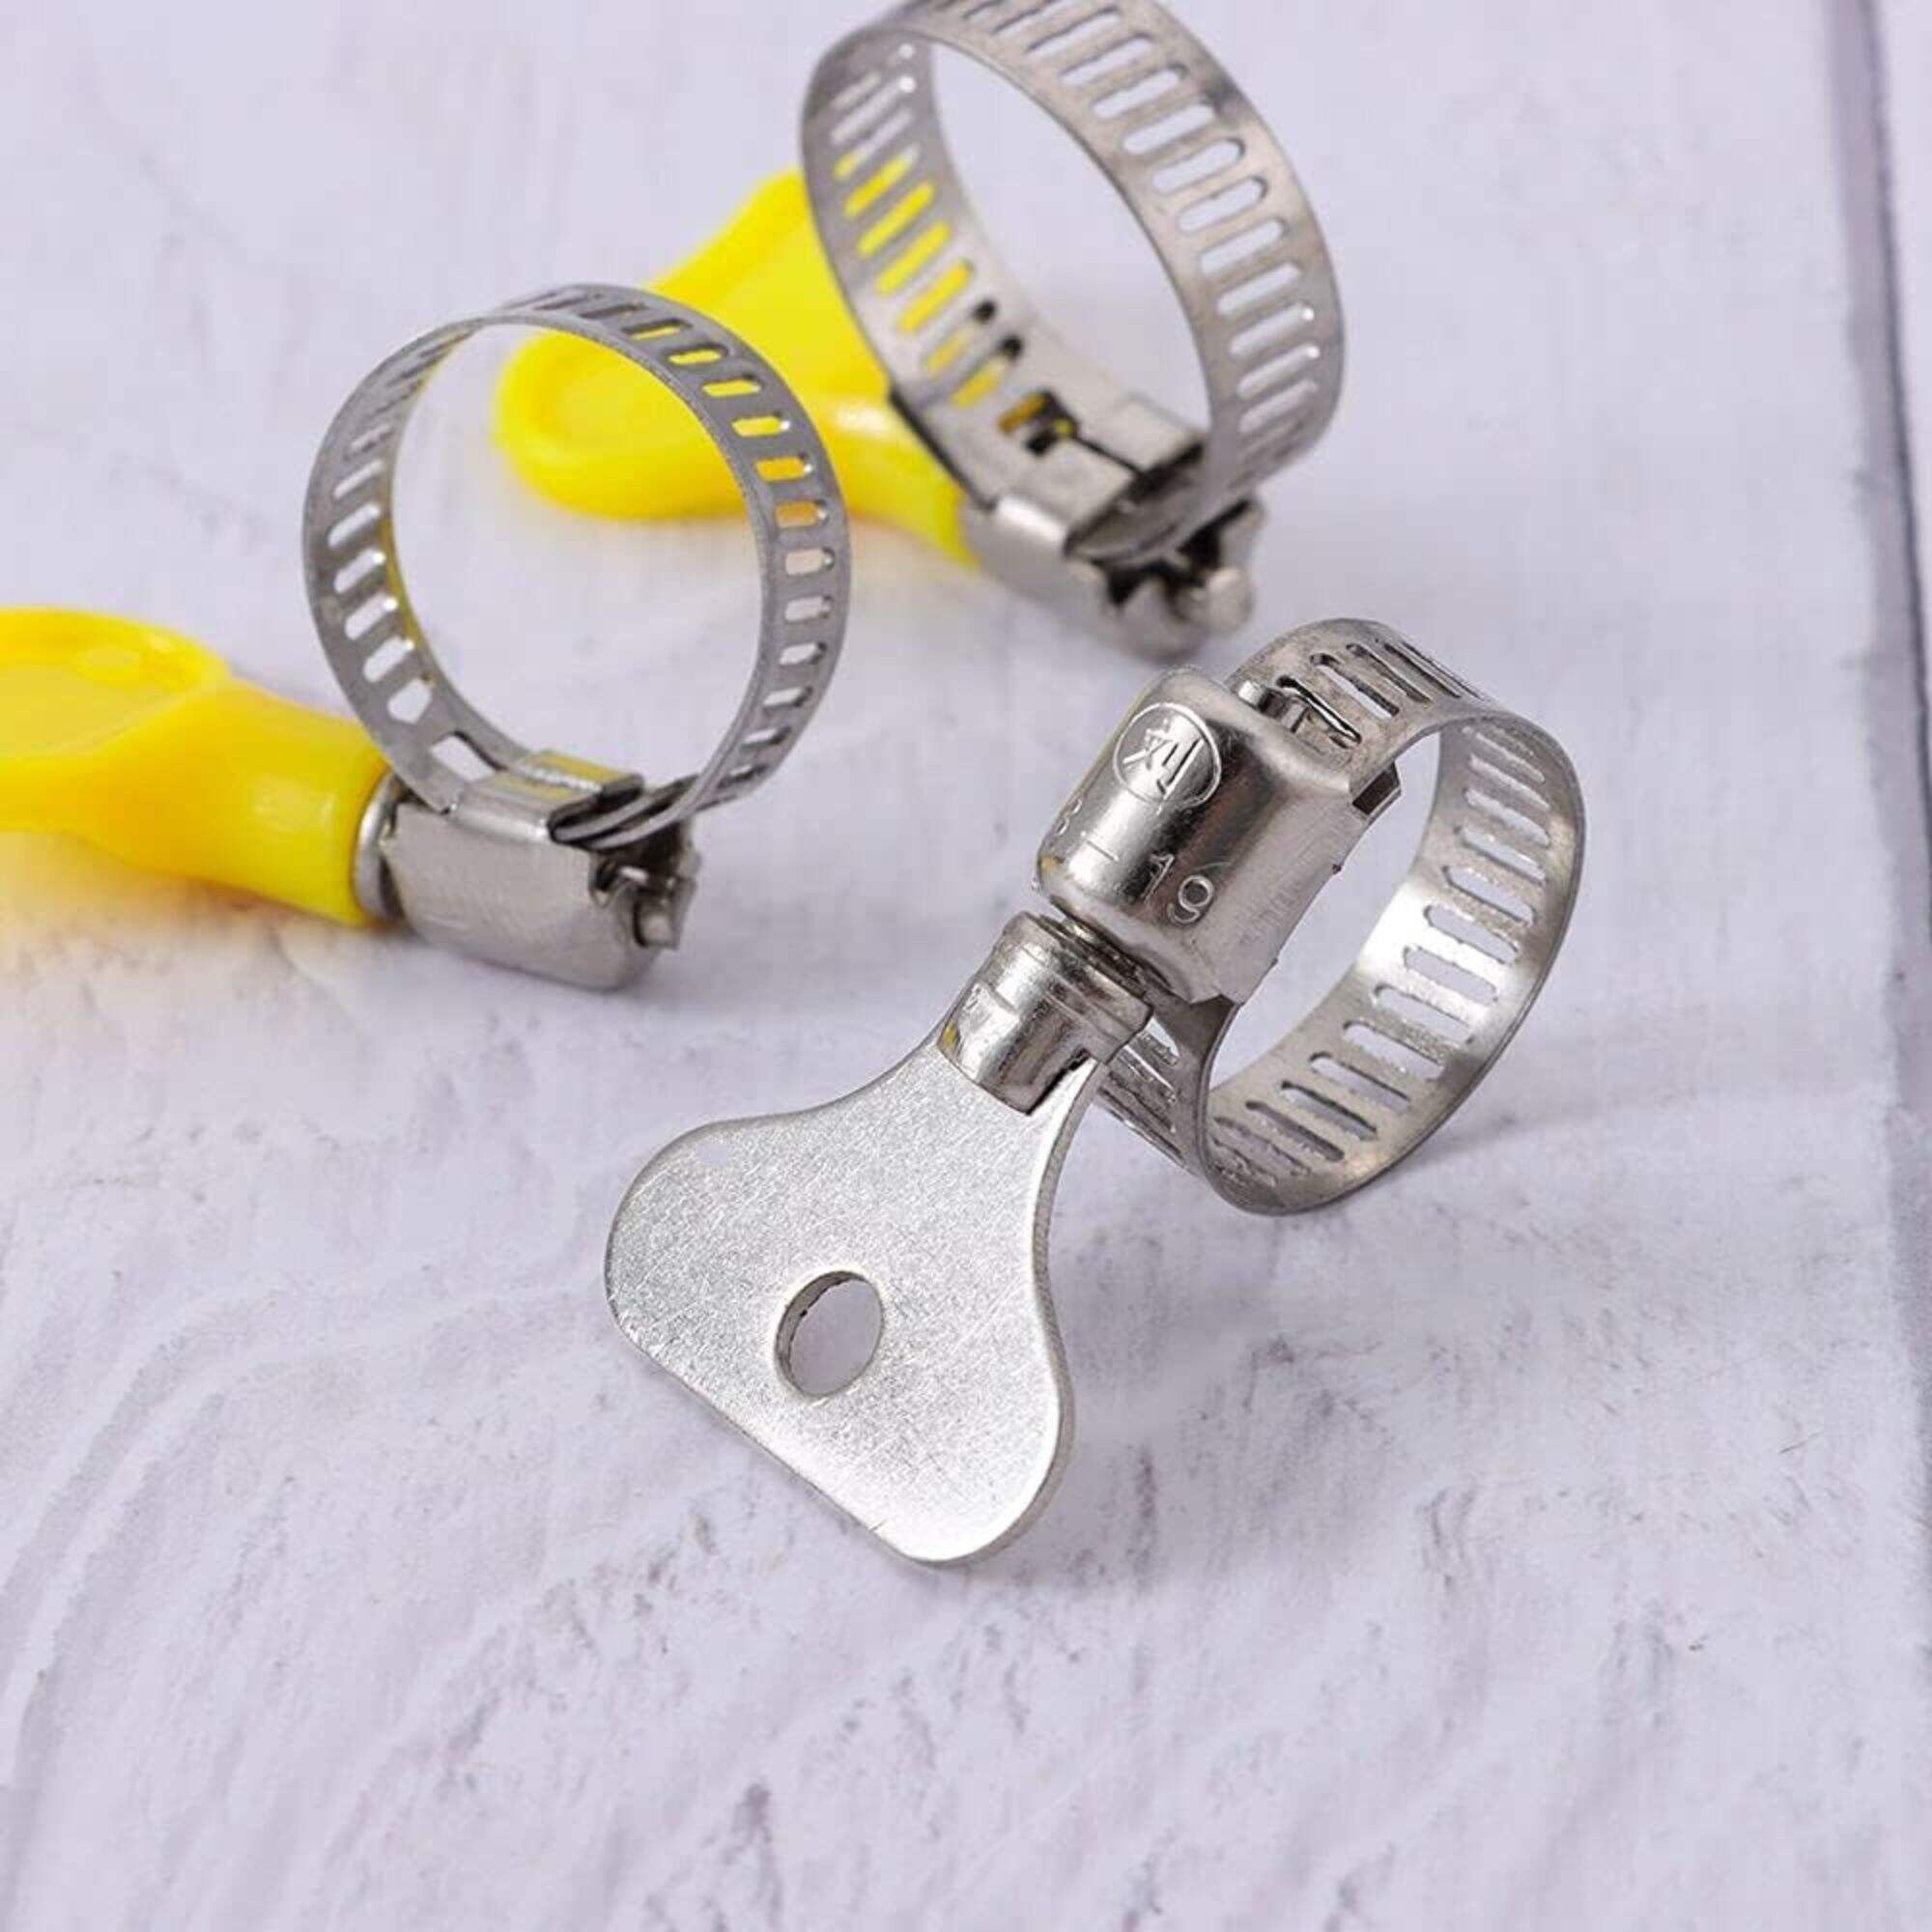 10-38mm Adjustable Yellow Plastic Handle Hand Wriggle Hose Clamps Pipe Clip